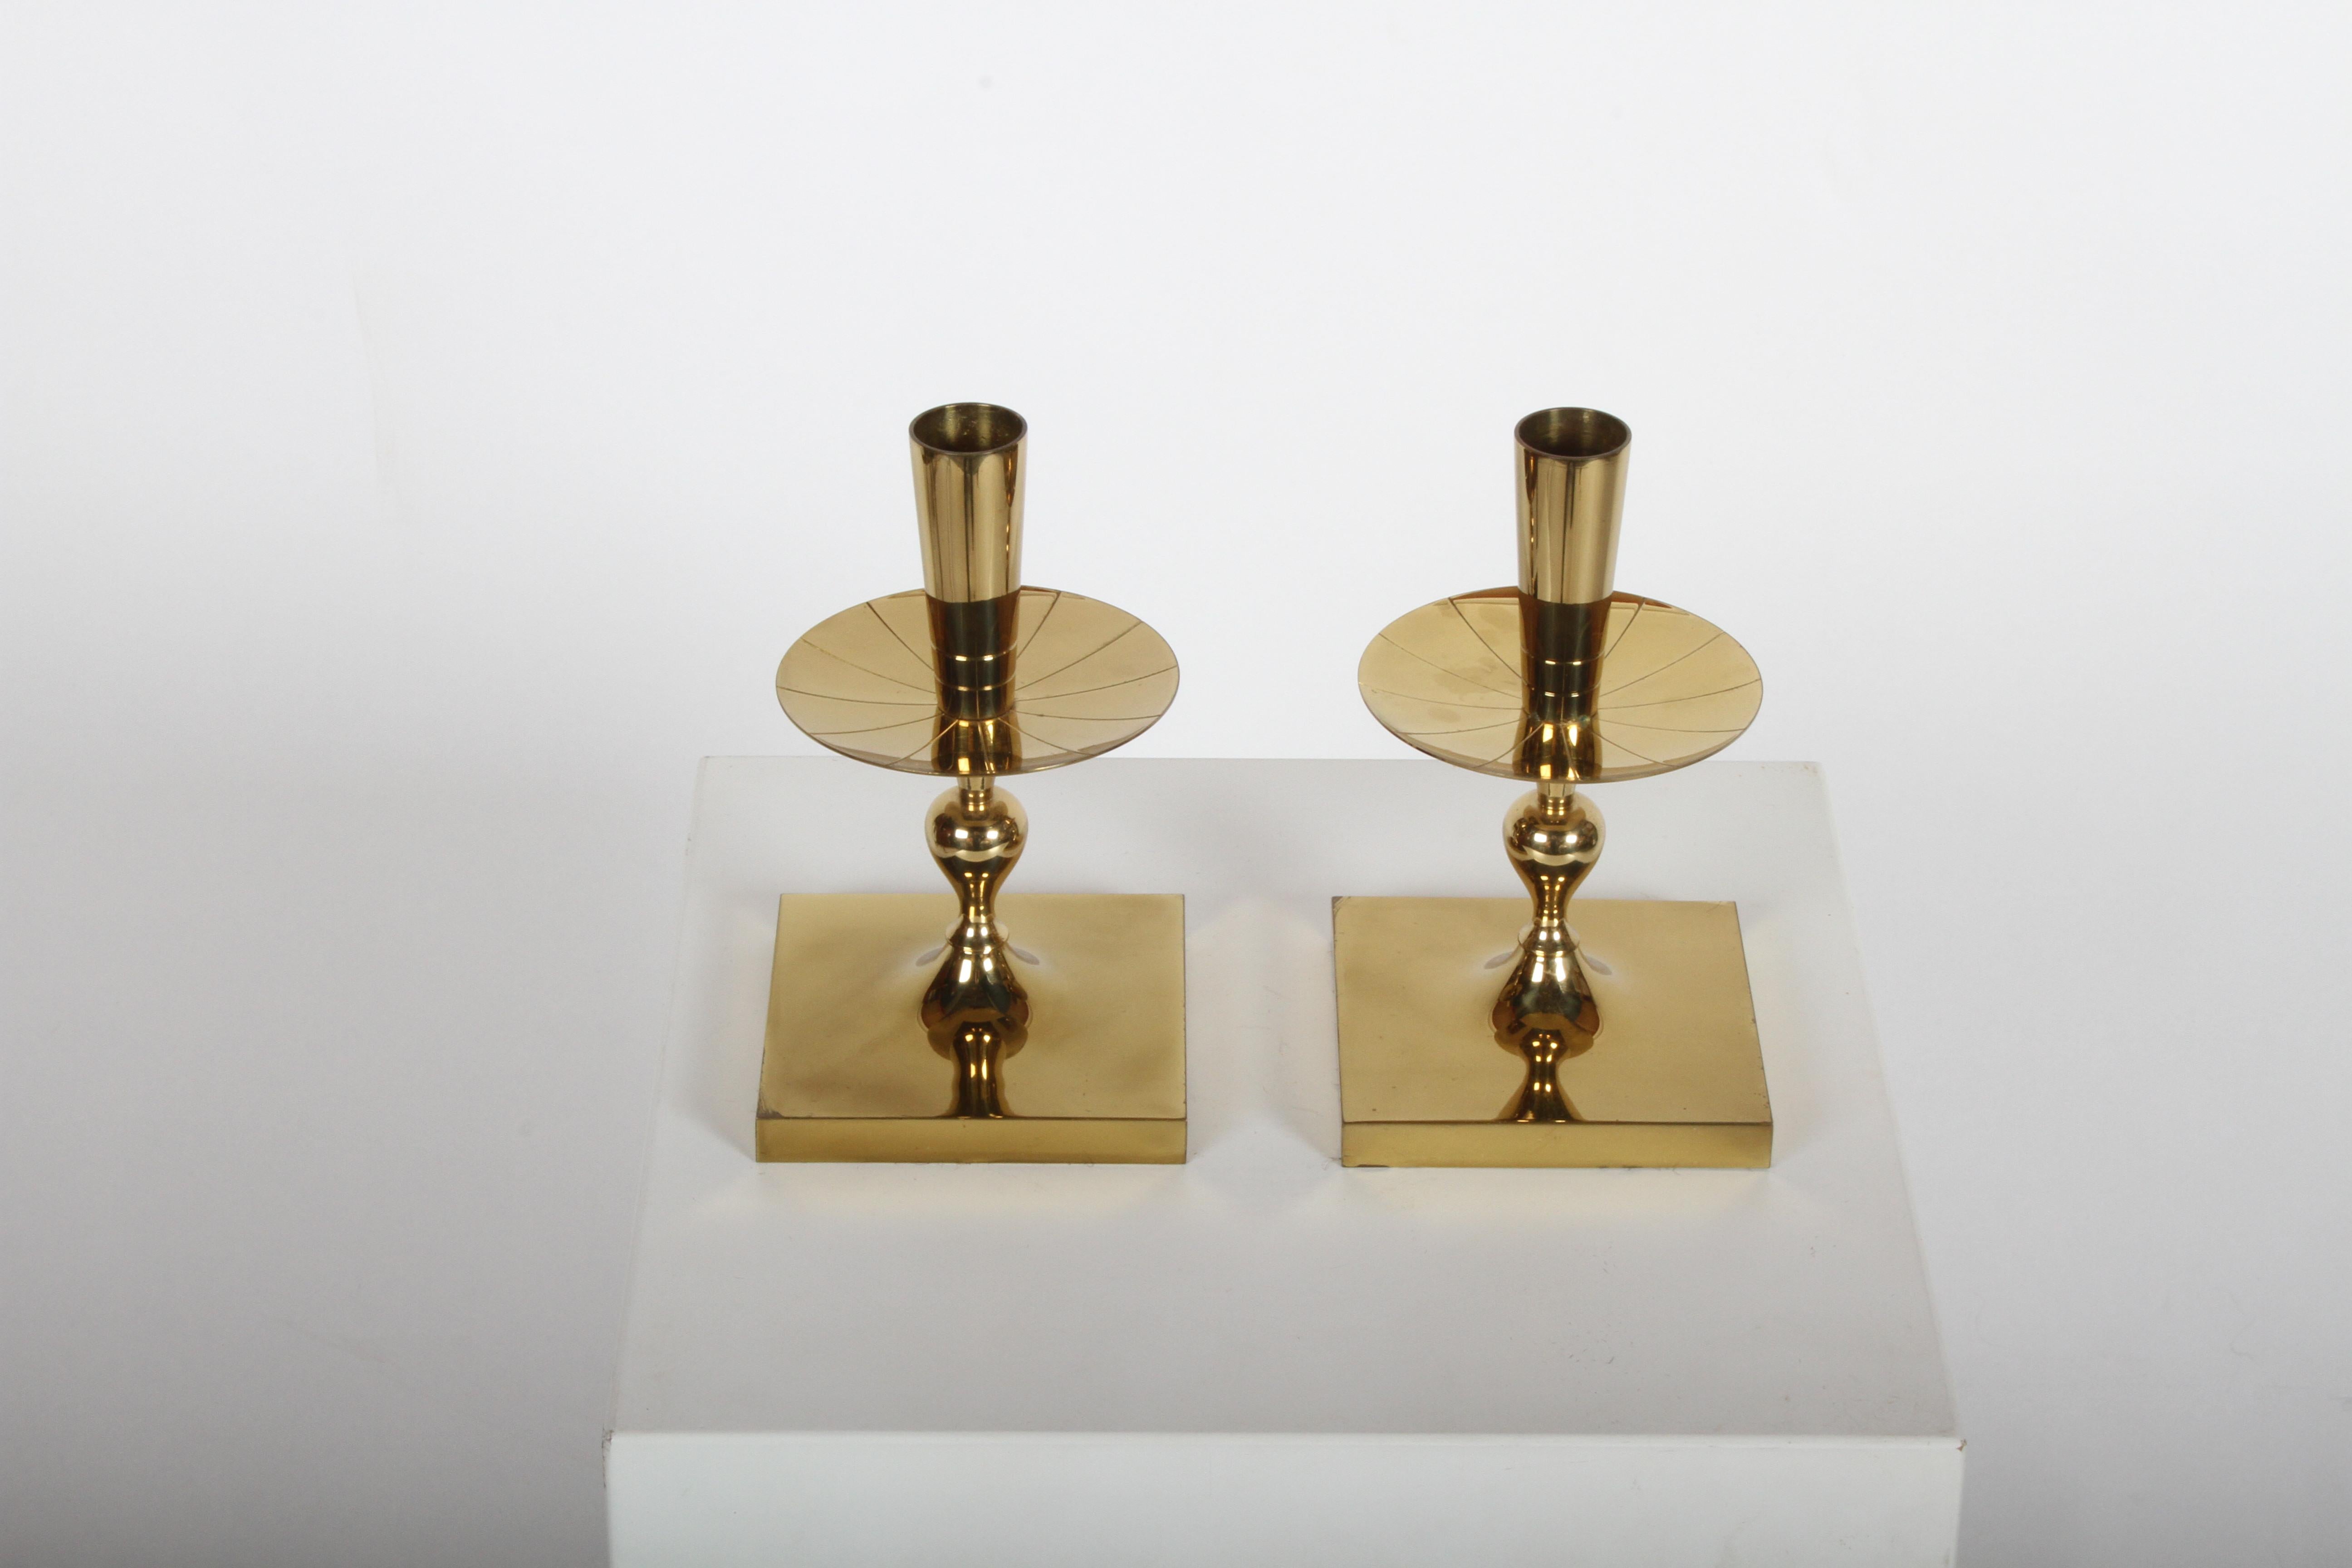 Pair of Tommi Parzinger brass candleholders, made by Dorlyn-Silversmiths, circa 1950s. Candleholders appear to have little or no use. Branded made by Dorlyn-Silversmiths. Minor patina.